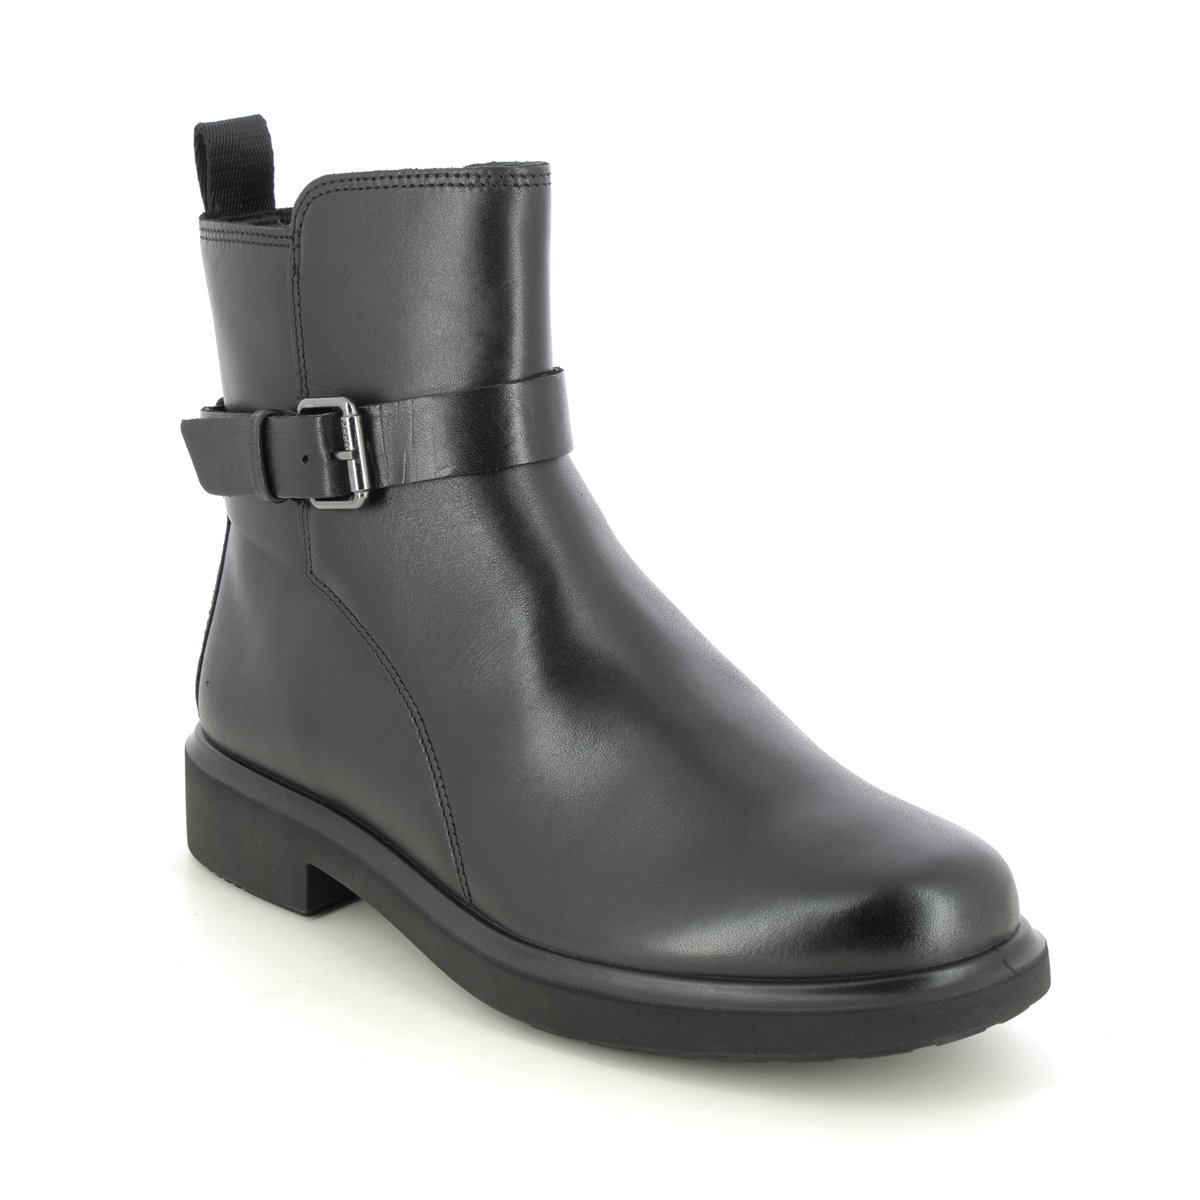 Ecco Amsterdam Tex Metropole Black Leather Womens Ankle Boots 222013-01001 In Size 41 In Plain Black Leather